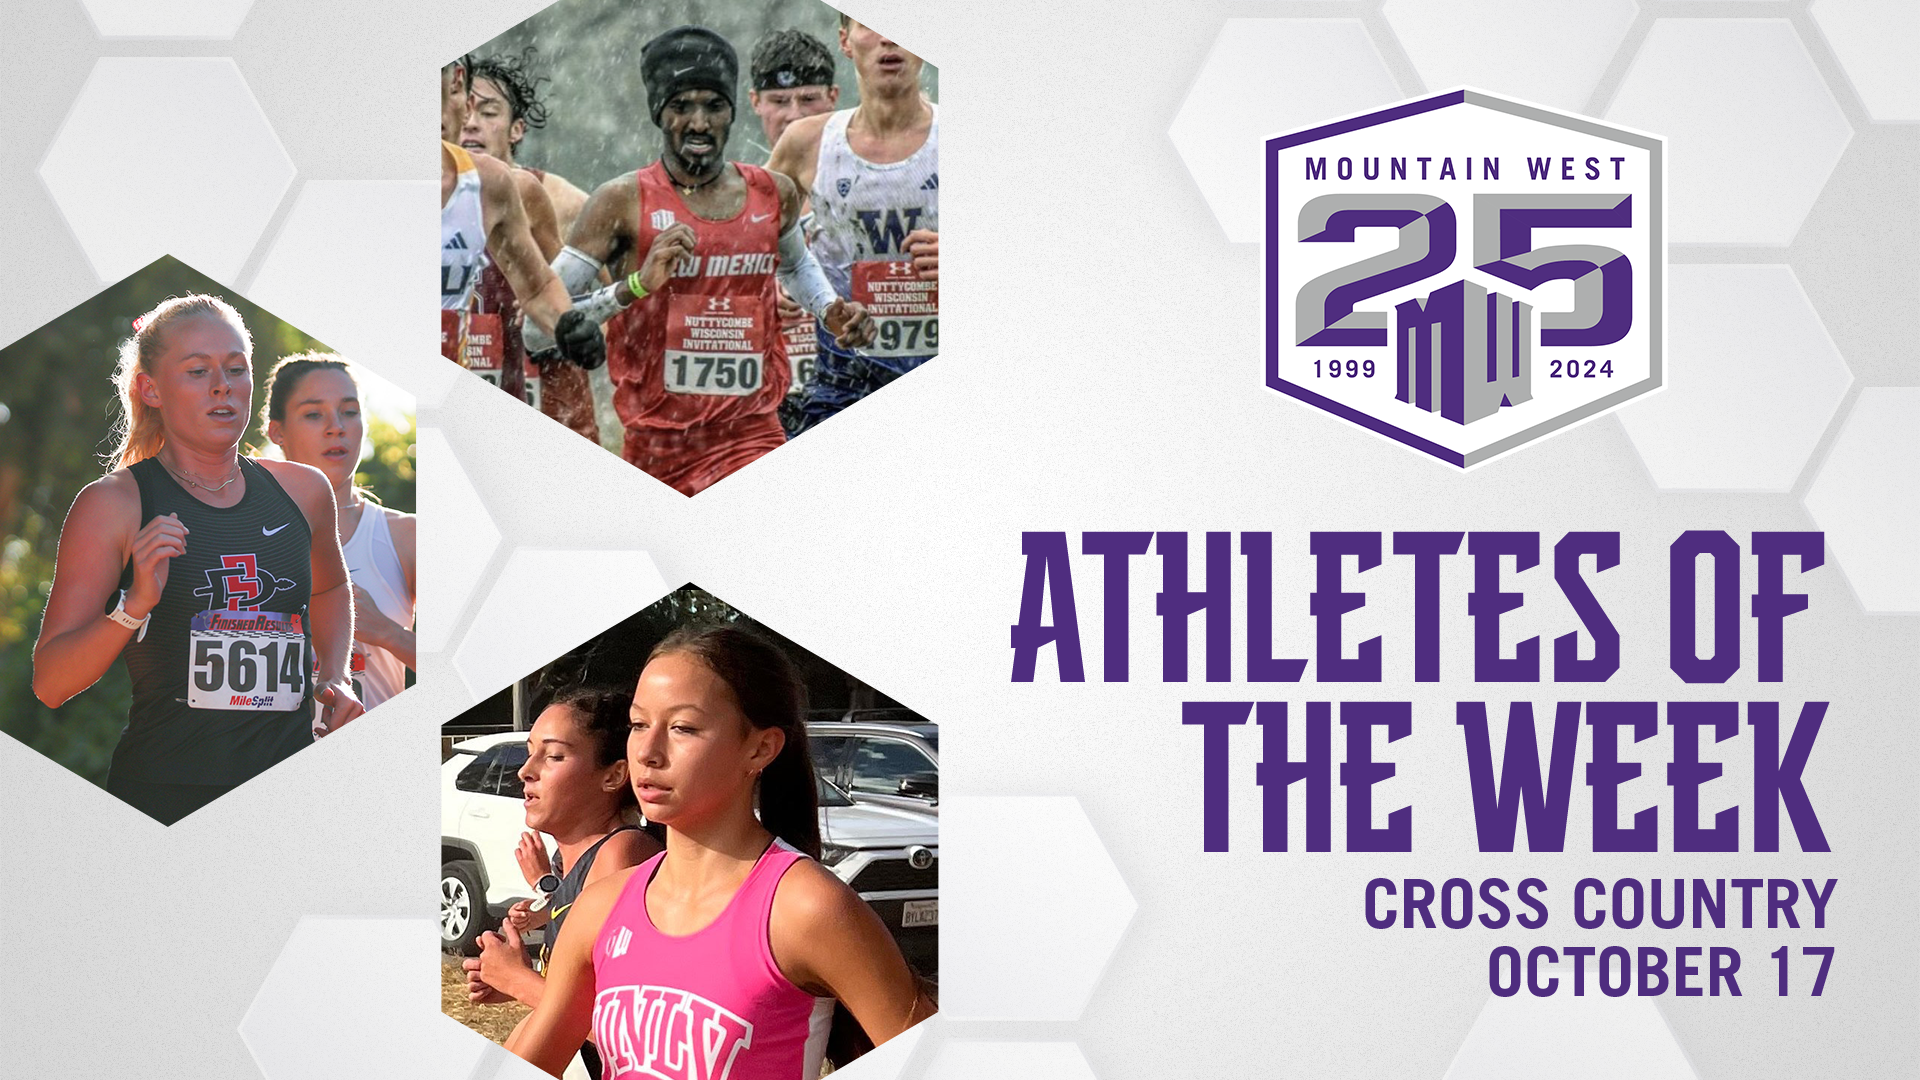 MW Cross Country Athletes of the Week - Oct. 17